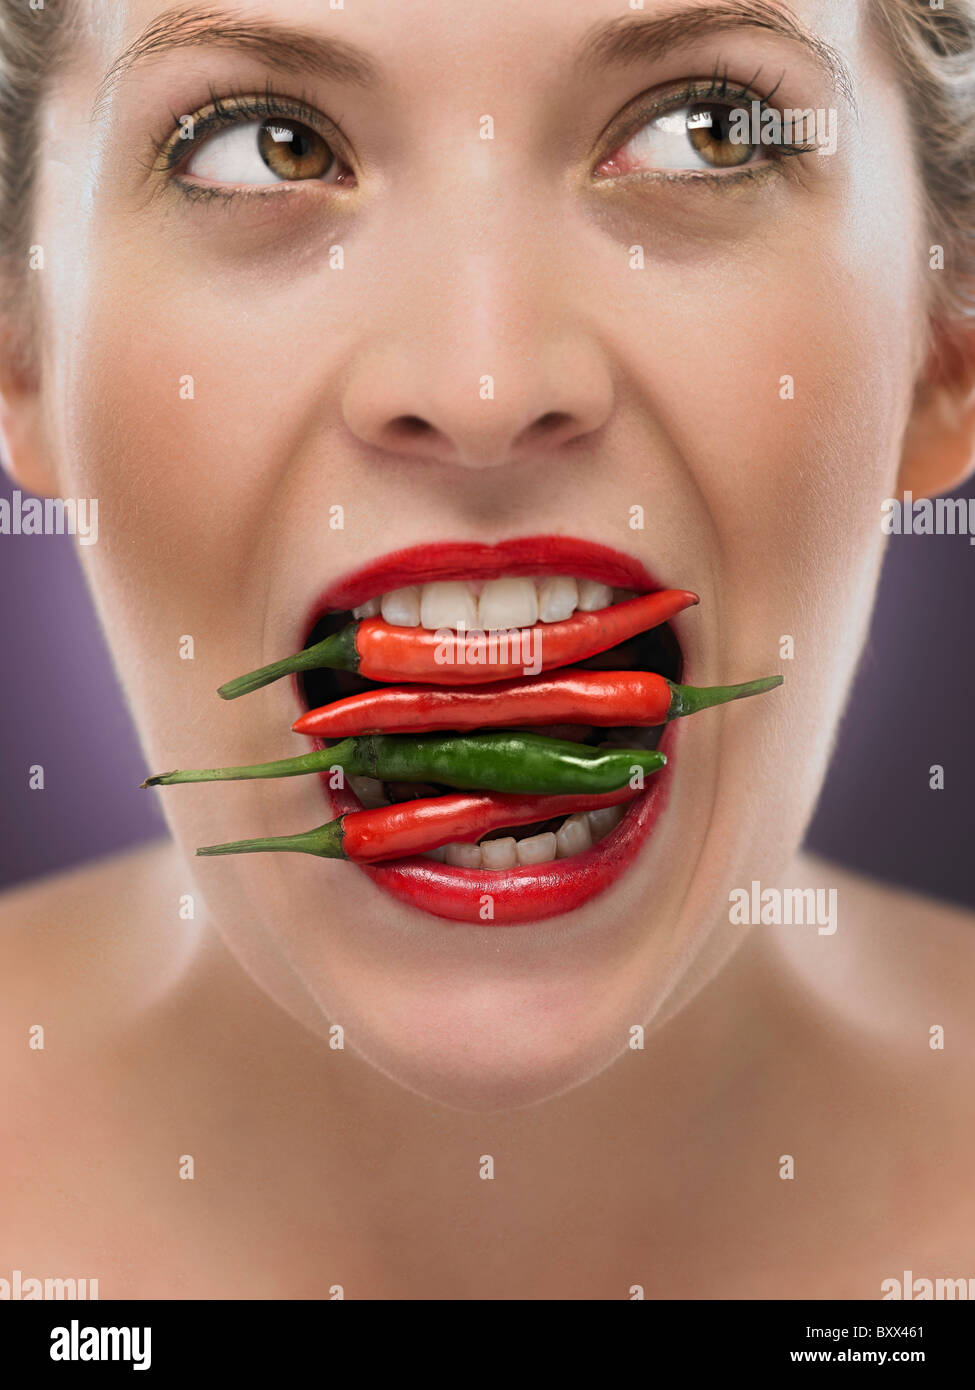 white blonde woman with chili's in her mouth Stock Photo